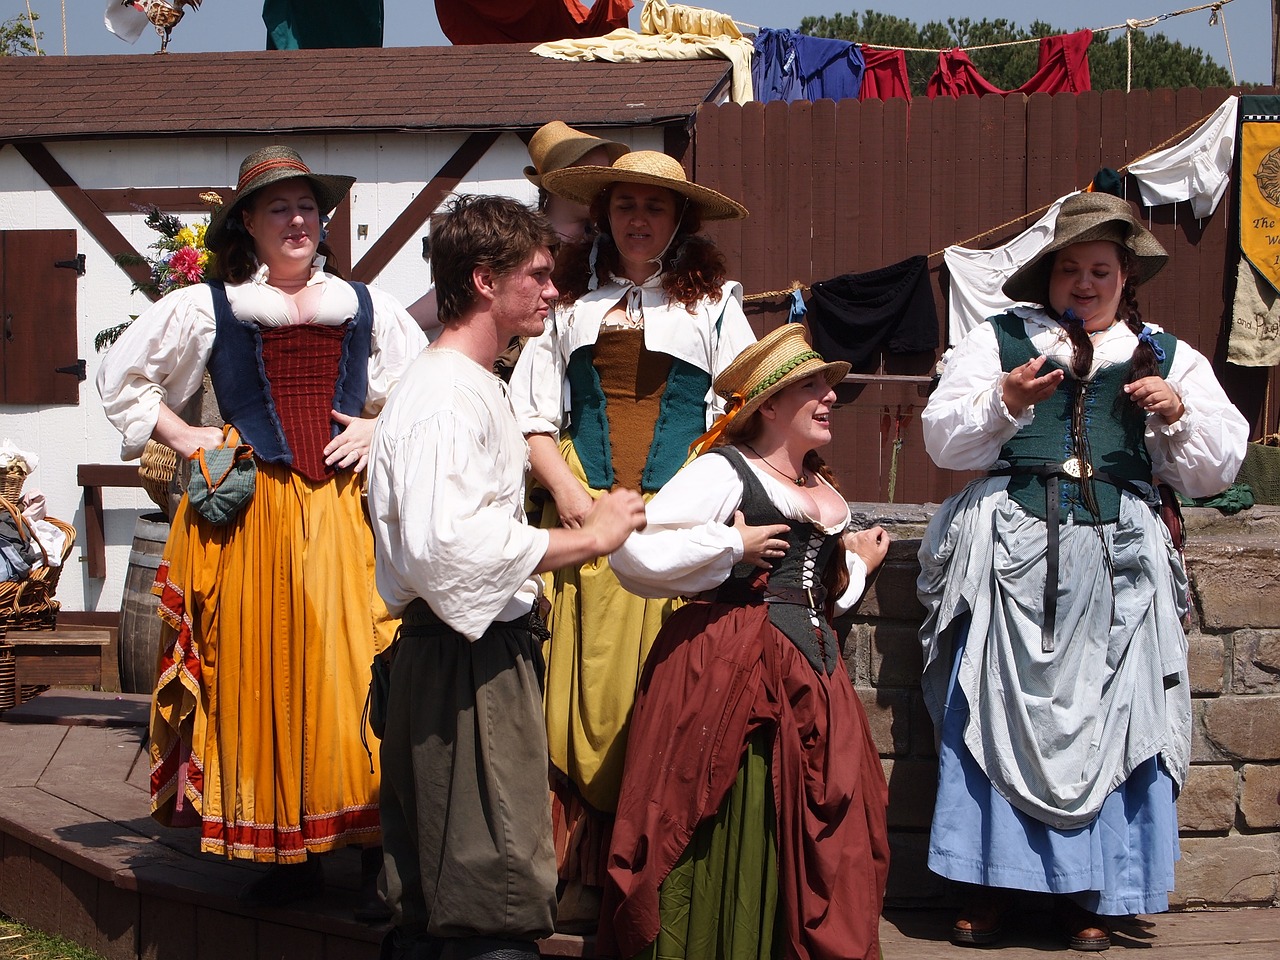 The best Renaissance fairs in the United States